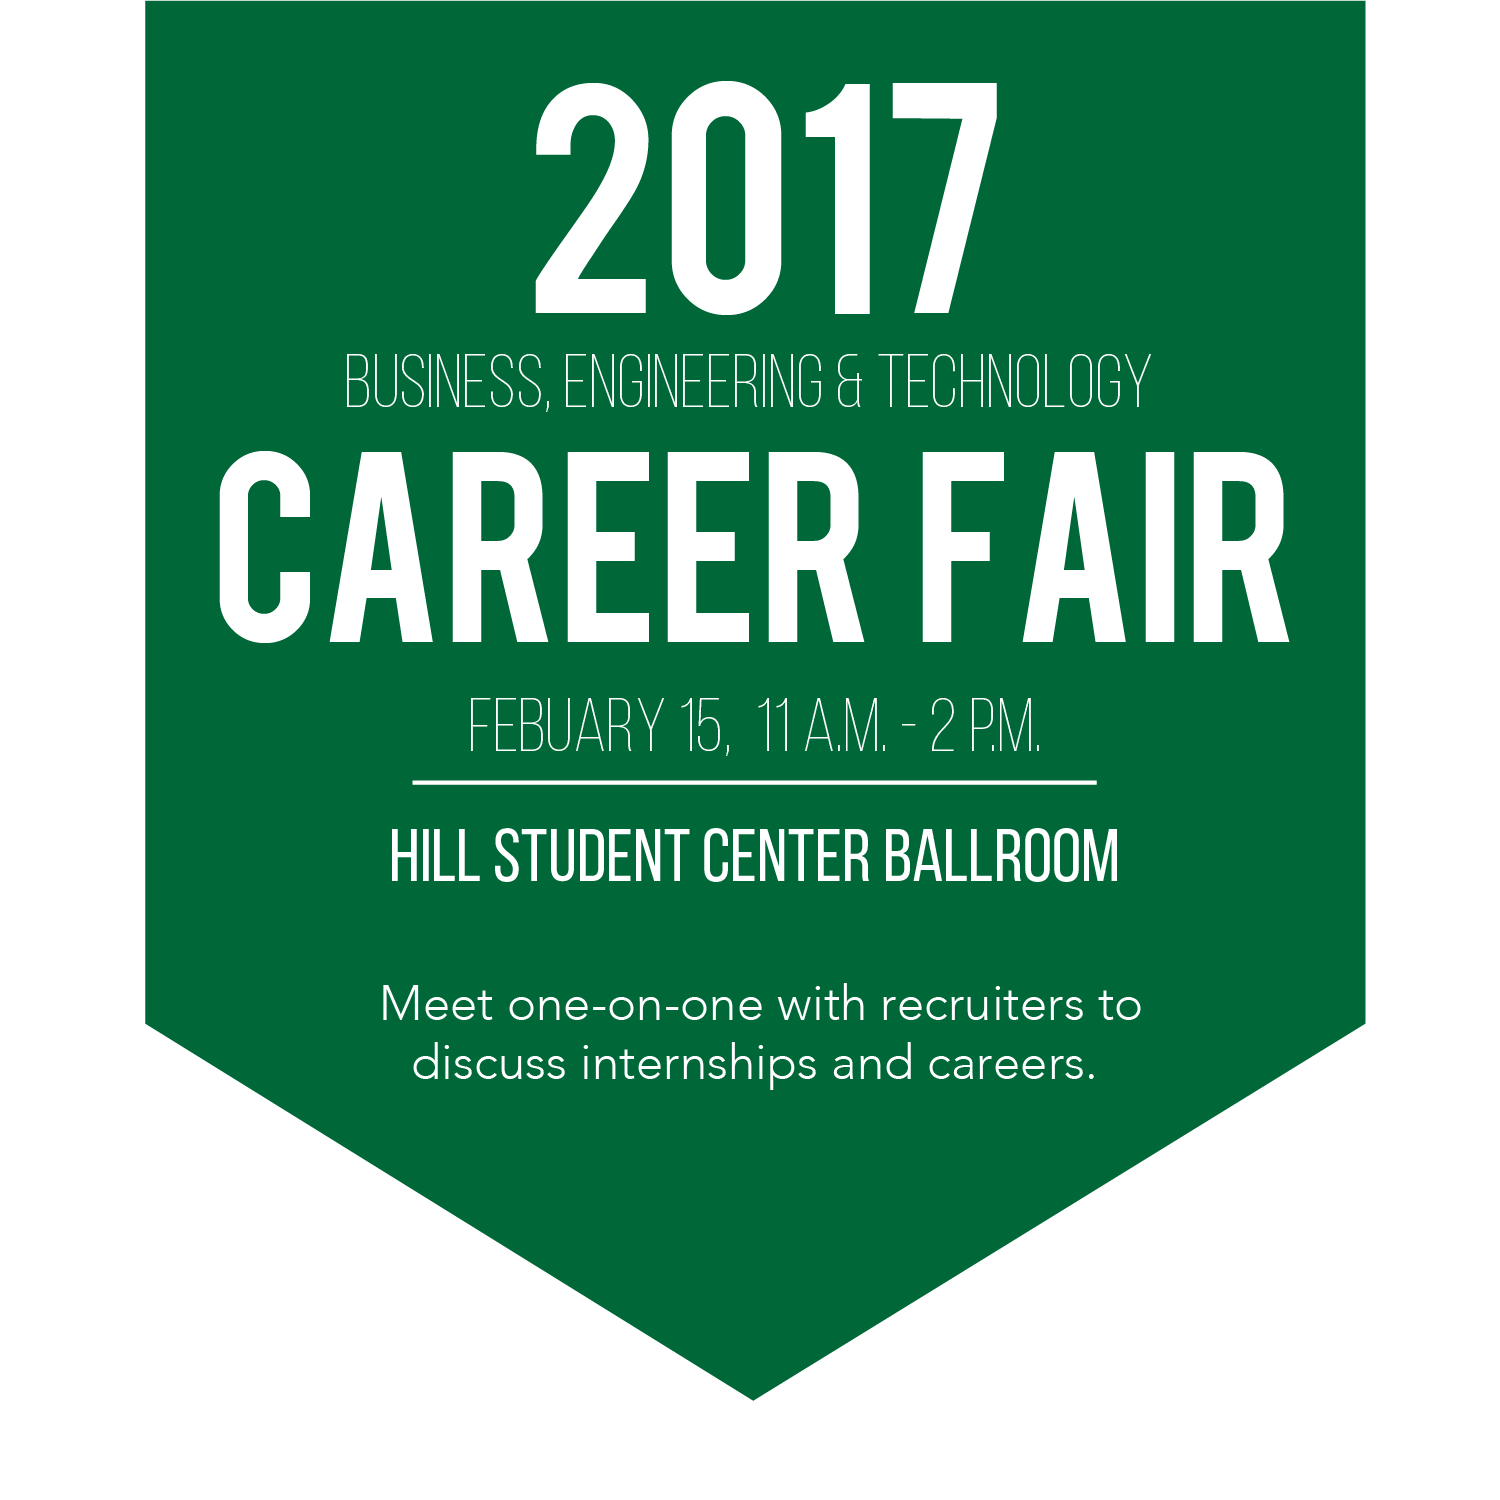 Business, Engineering and Technology Career Fair this Wednesday